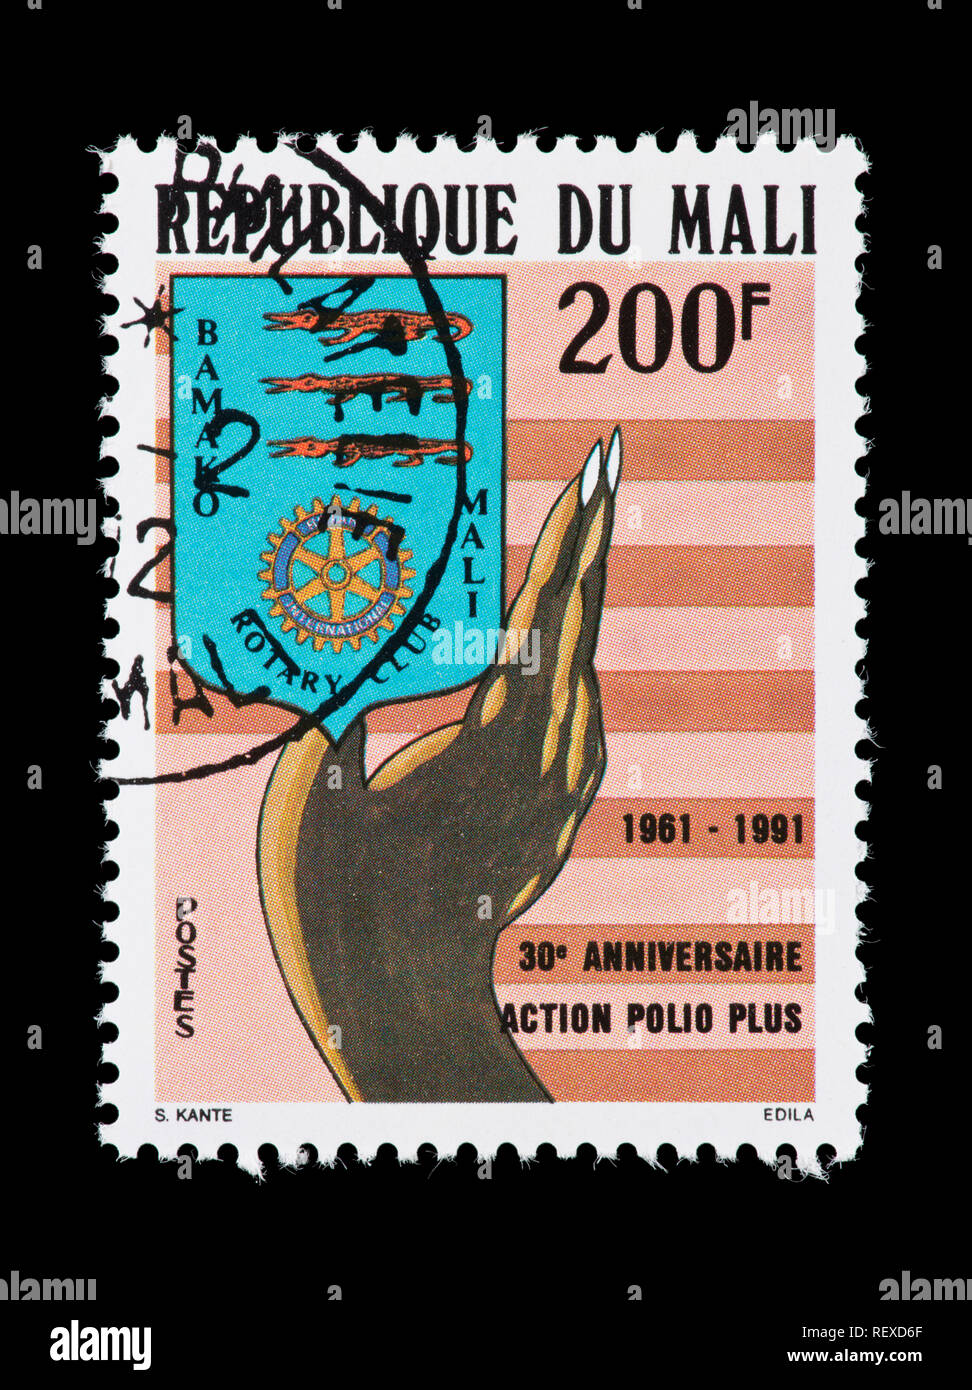 Postage stamp from Mali issued for the 30th anniversary of the Rotary Club effort against polio. Stock Photo